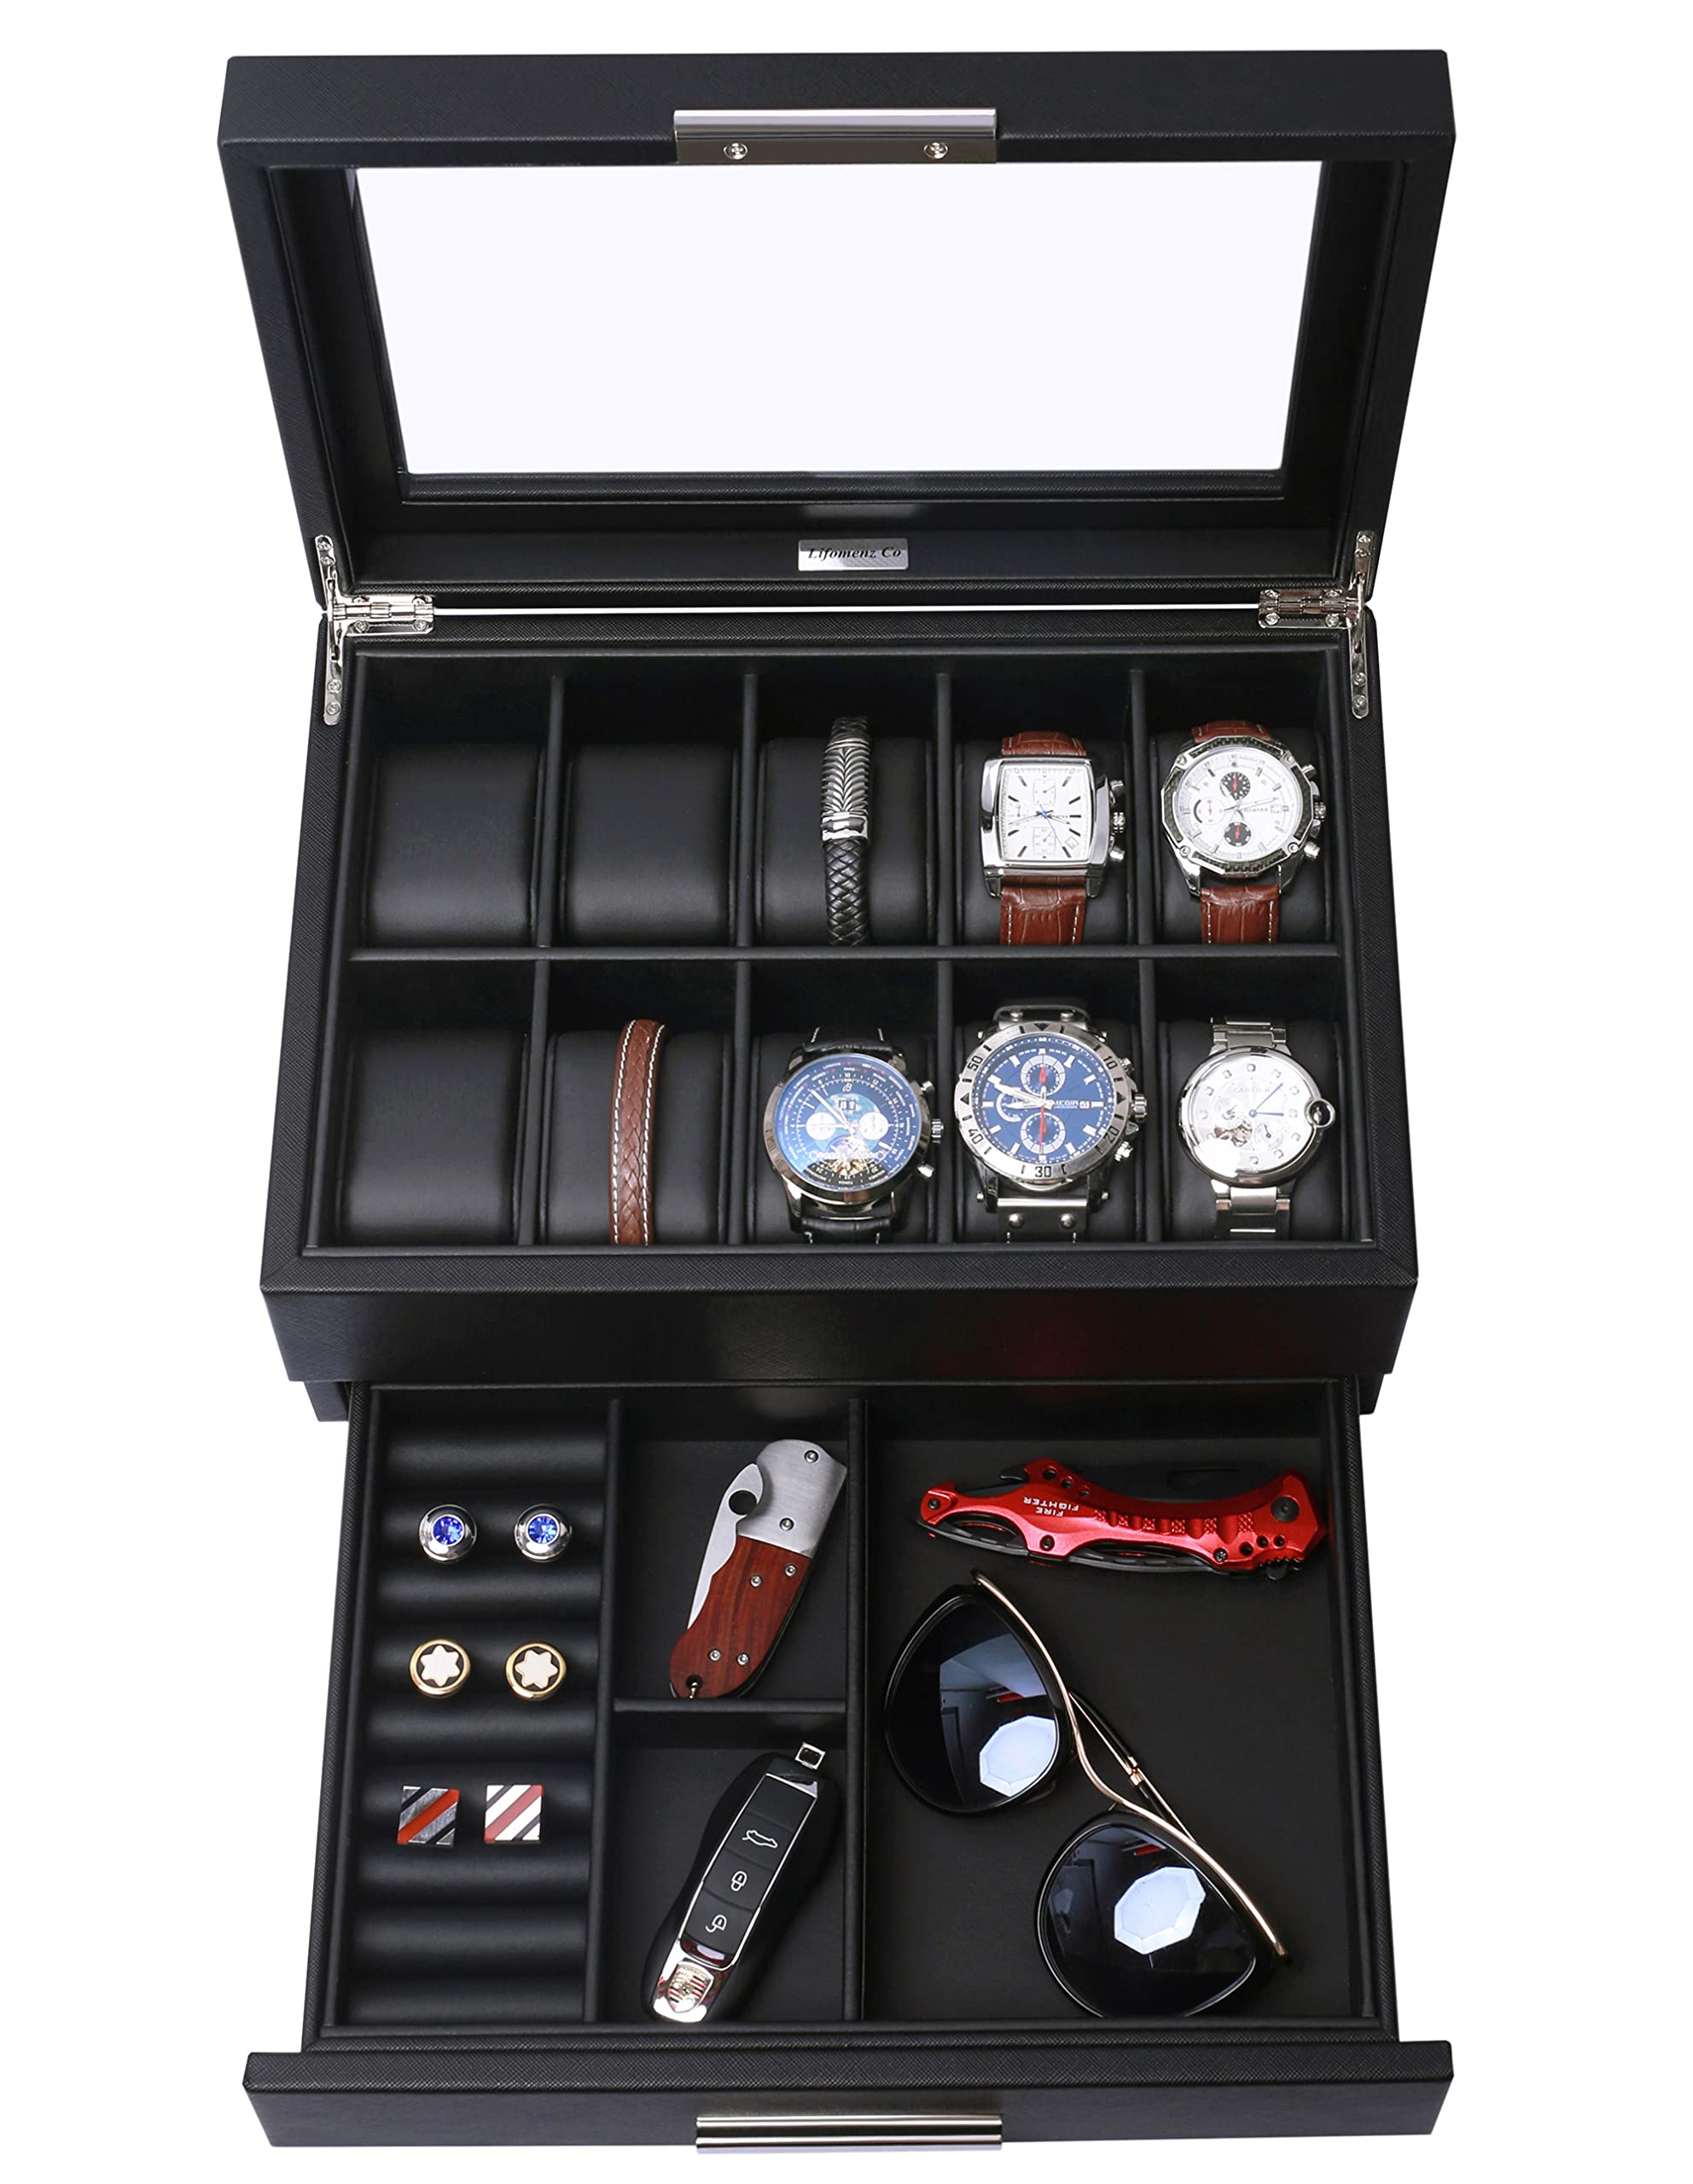 Lifomenz Co Leather Watch Box with Drawer for Men Watch Jewelry Box Organizer,Watch Display Case Catchall Tray for Men Accessories Organizer,Watch Storage with Large Watch Holder